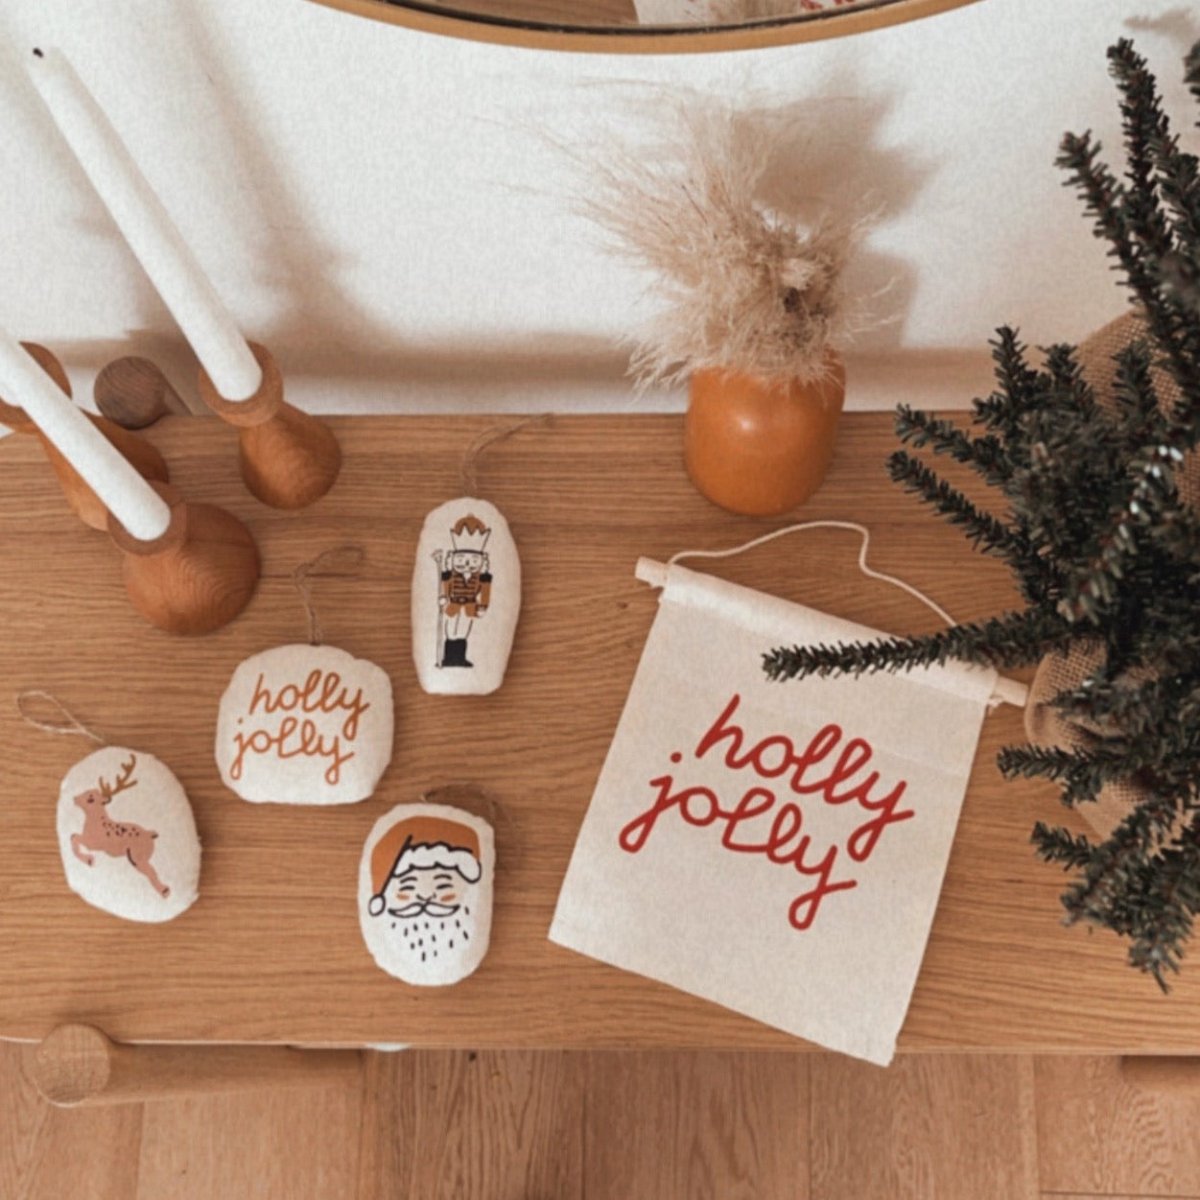 Imani Collective holly jolly hang sign - lily & onyx